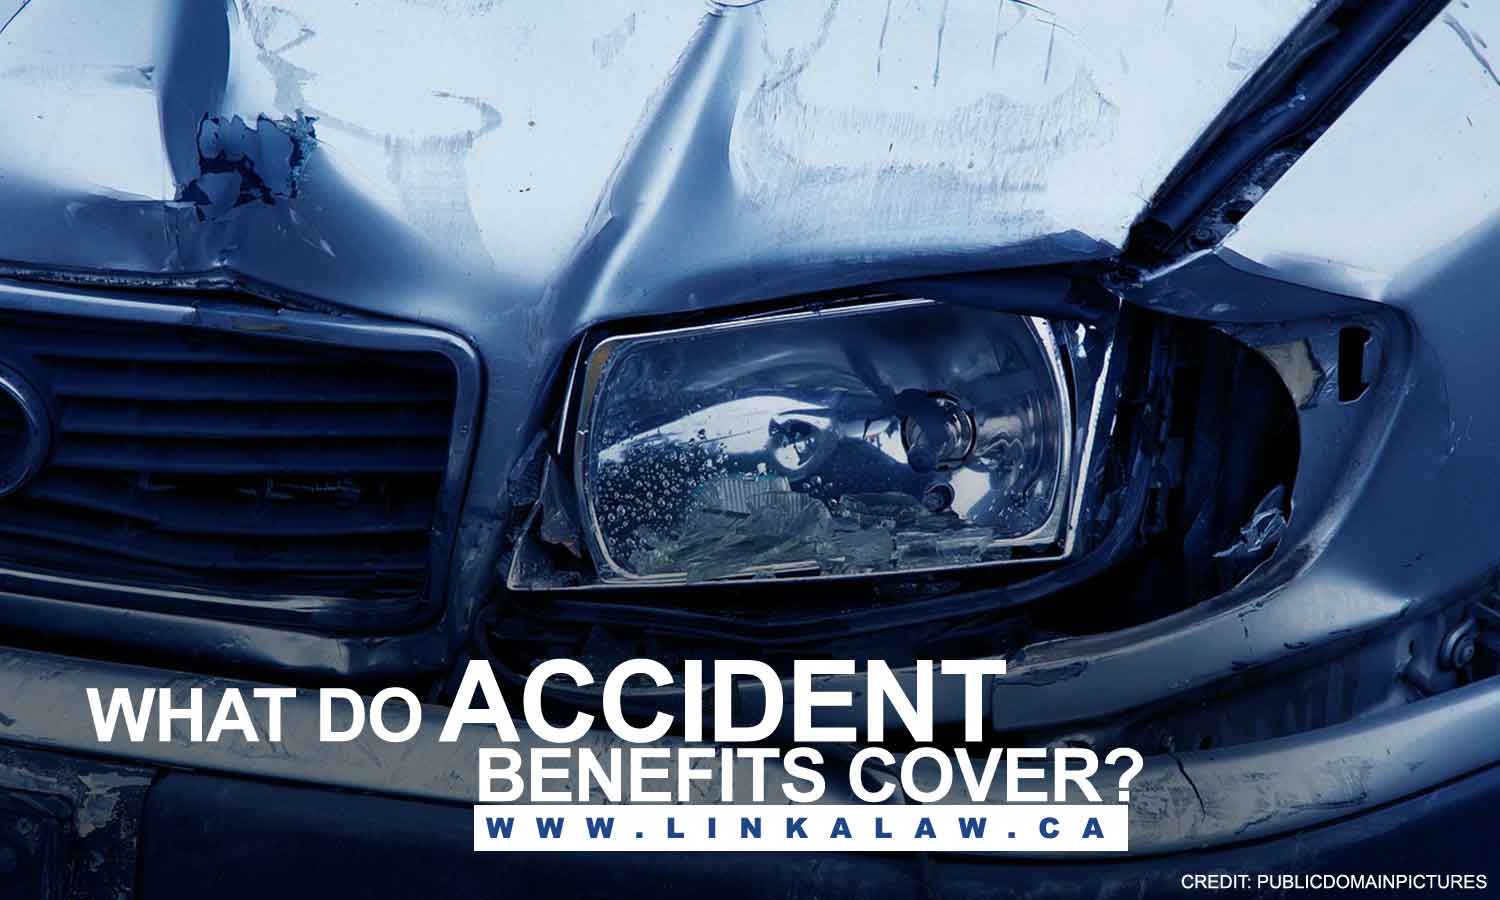 What do accident benefits cover?